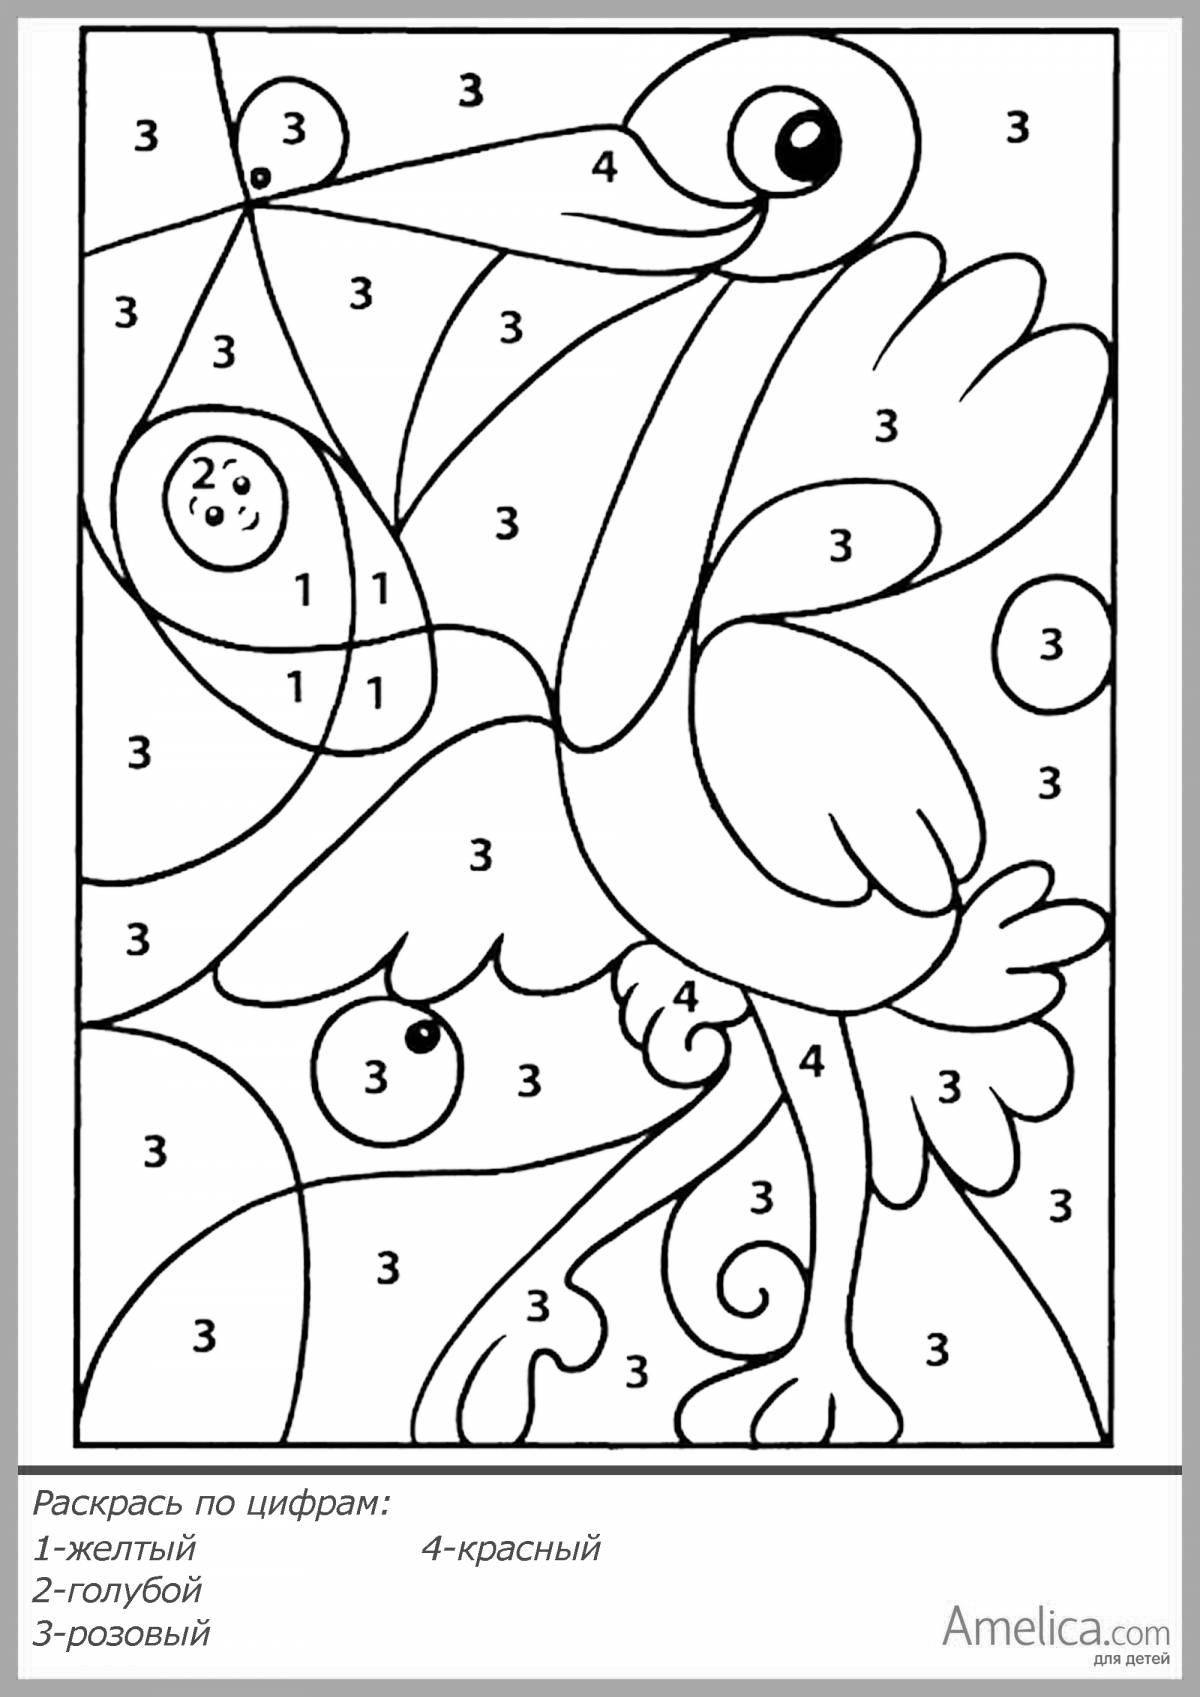 Fun coloring pages for kids 5-7 years old